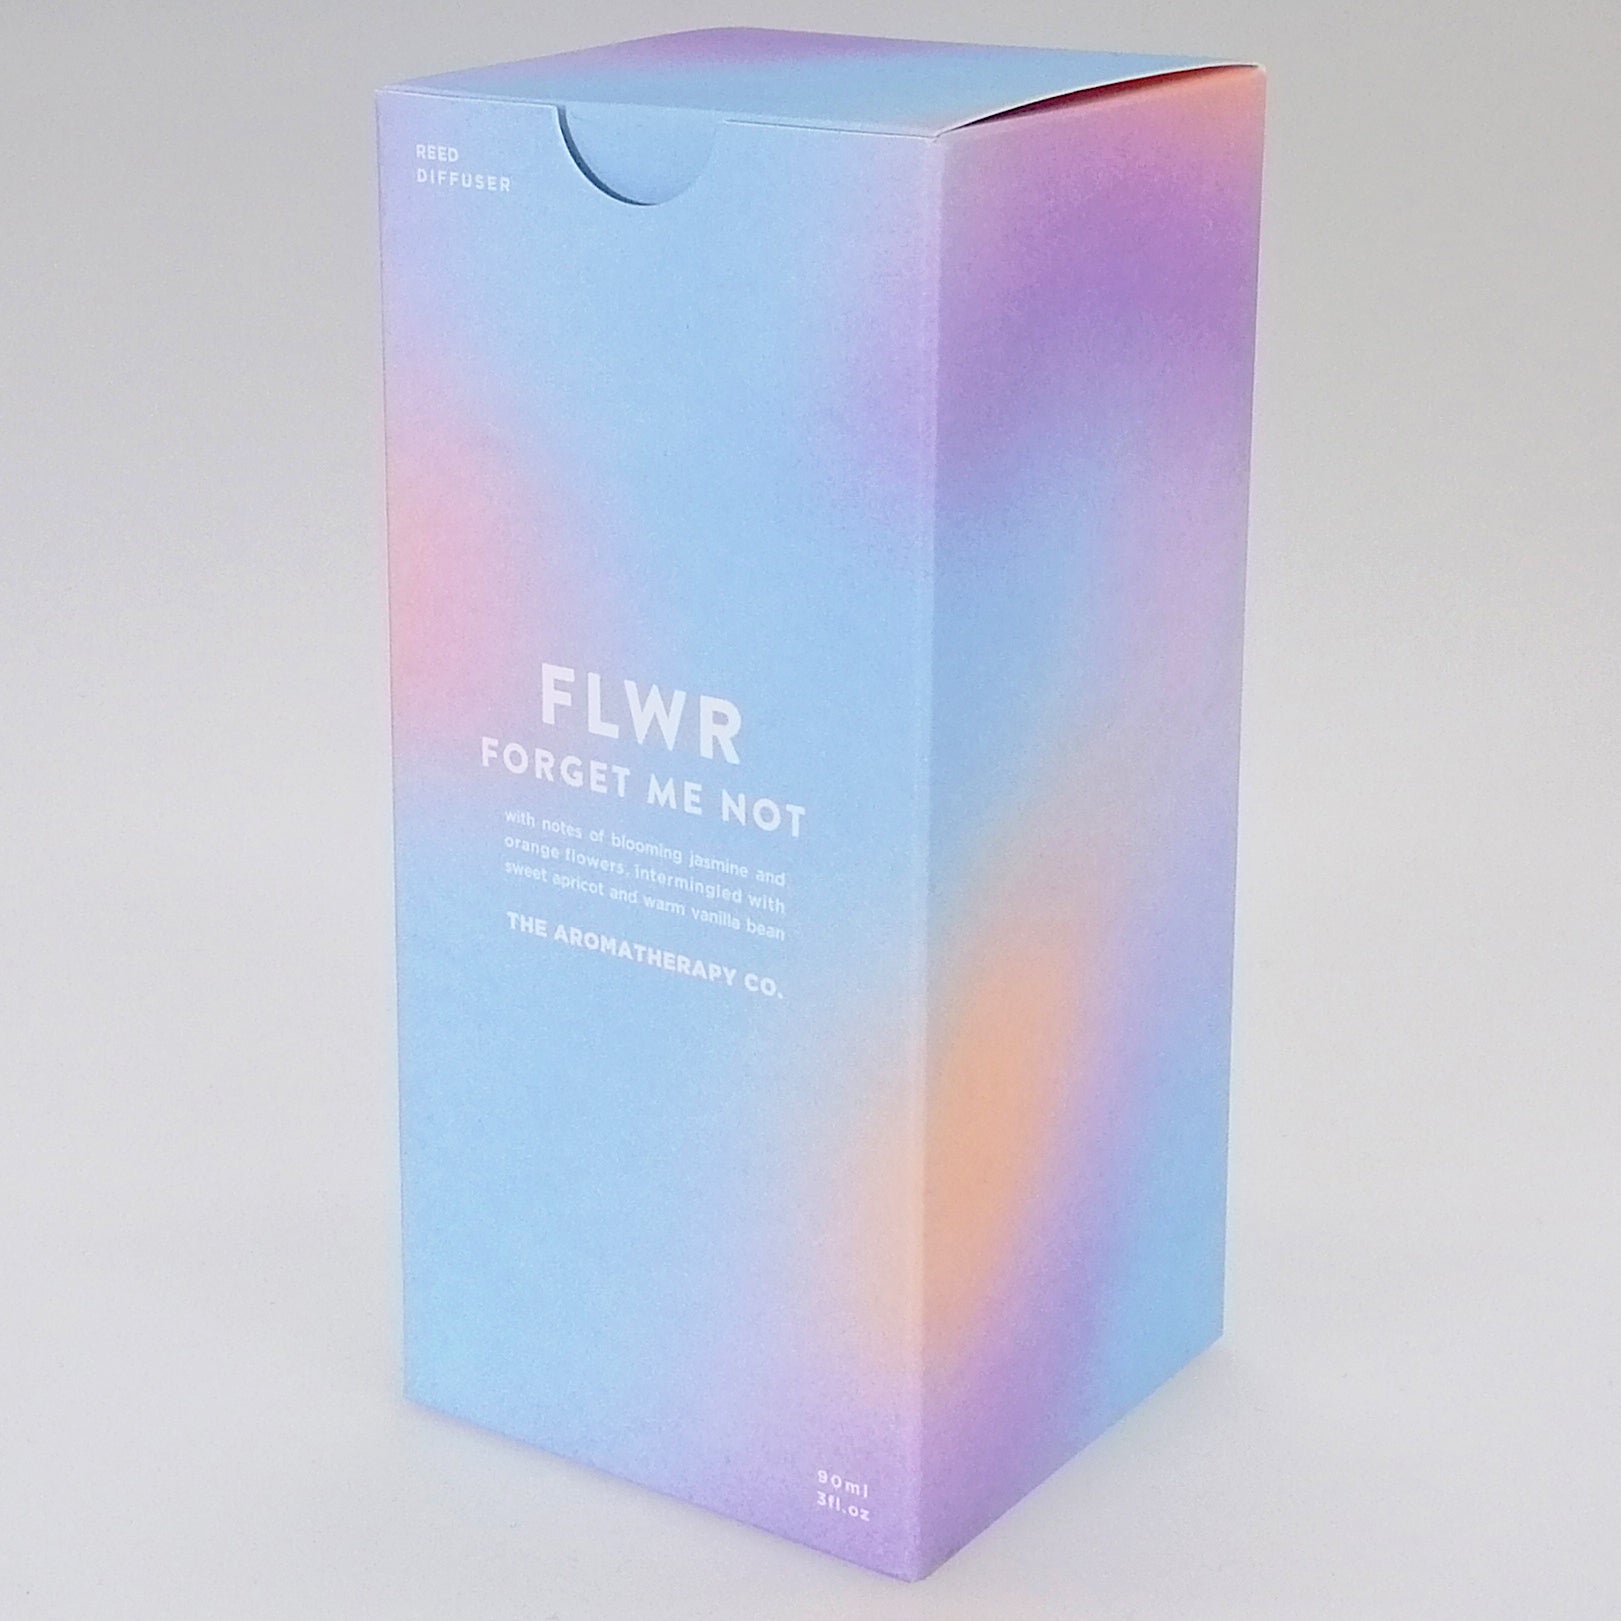 The Aromatherapy Co. FLWR Diffuser - Forget-Me-Not